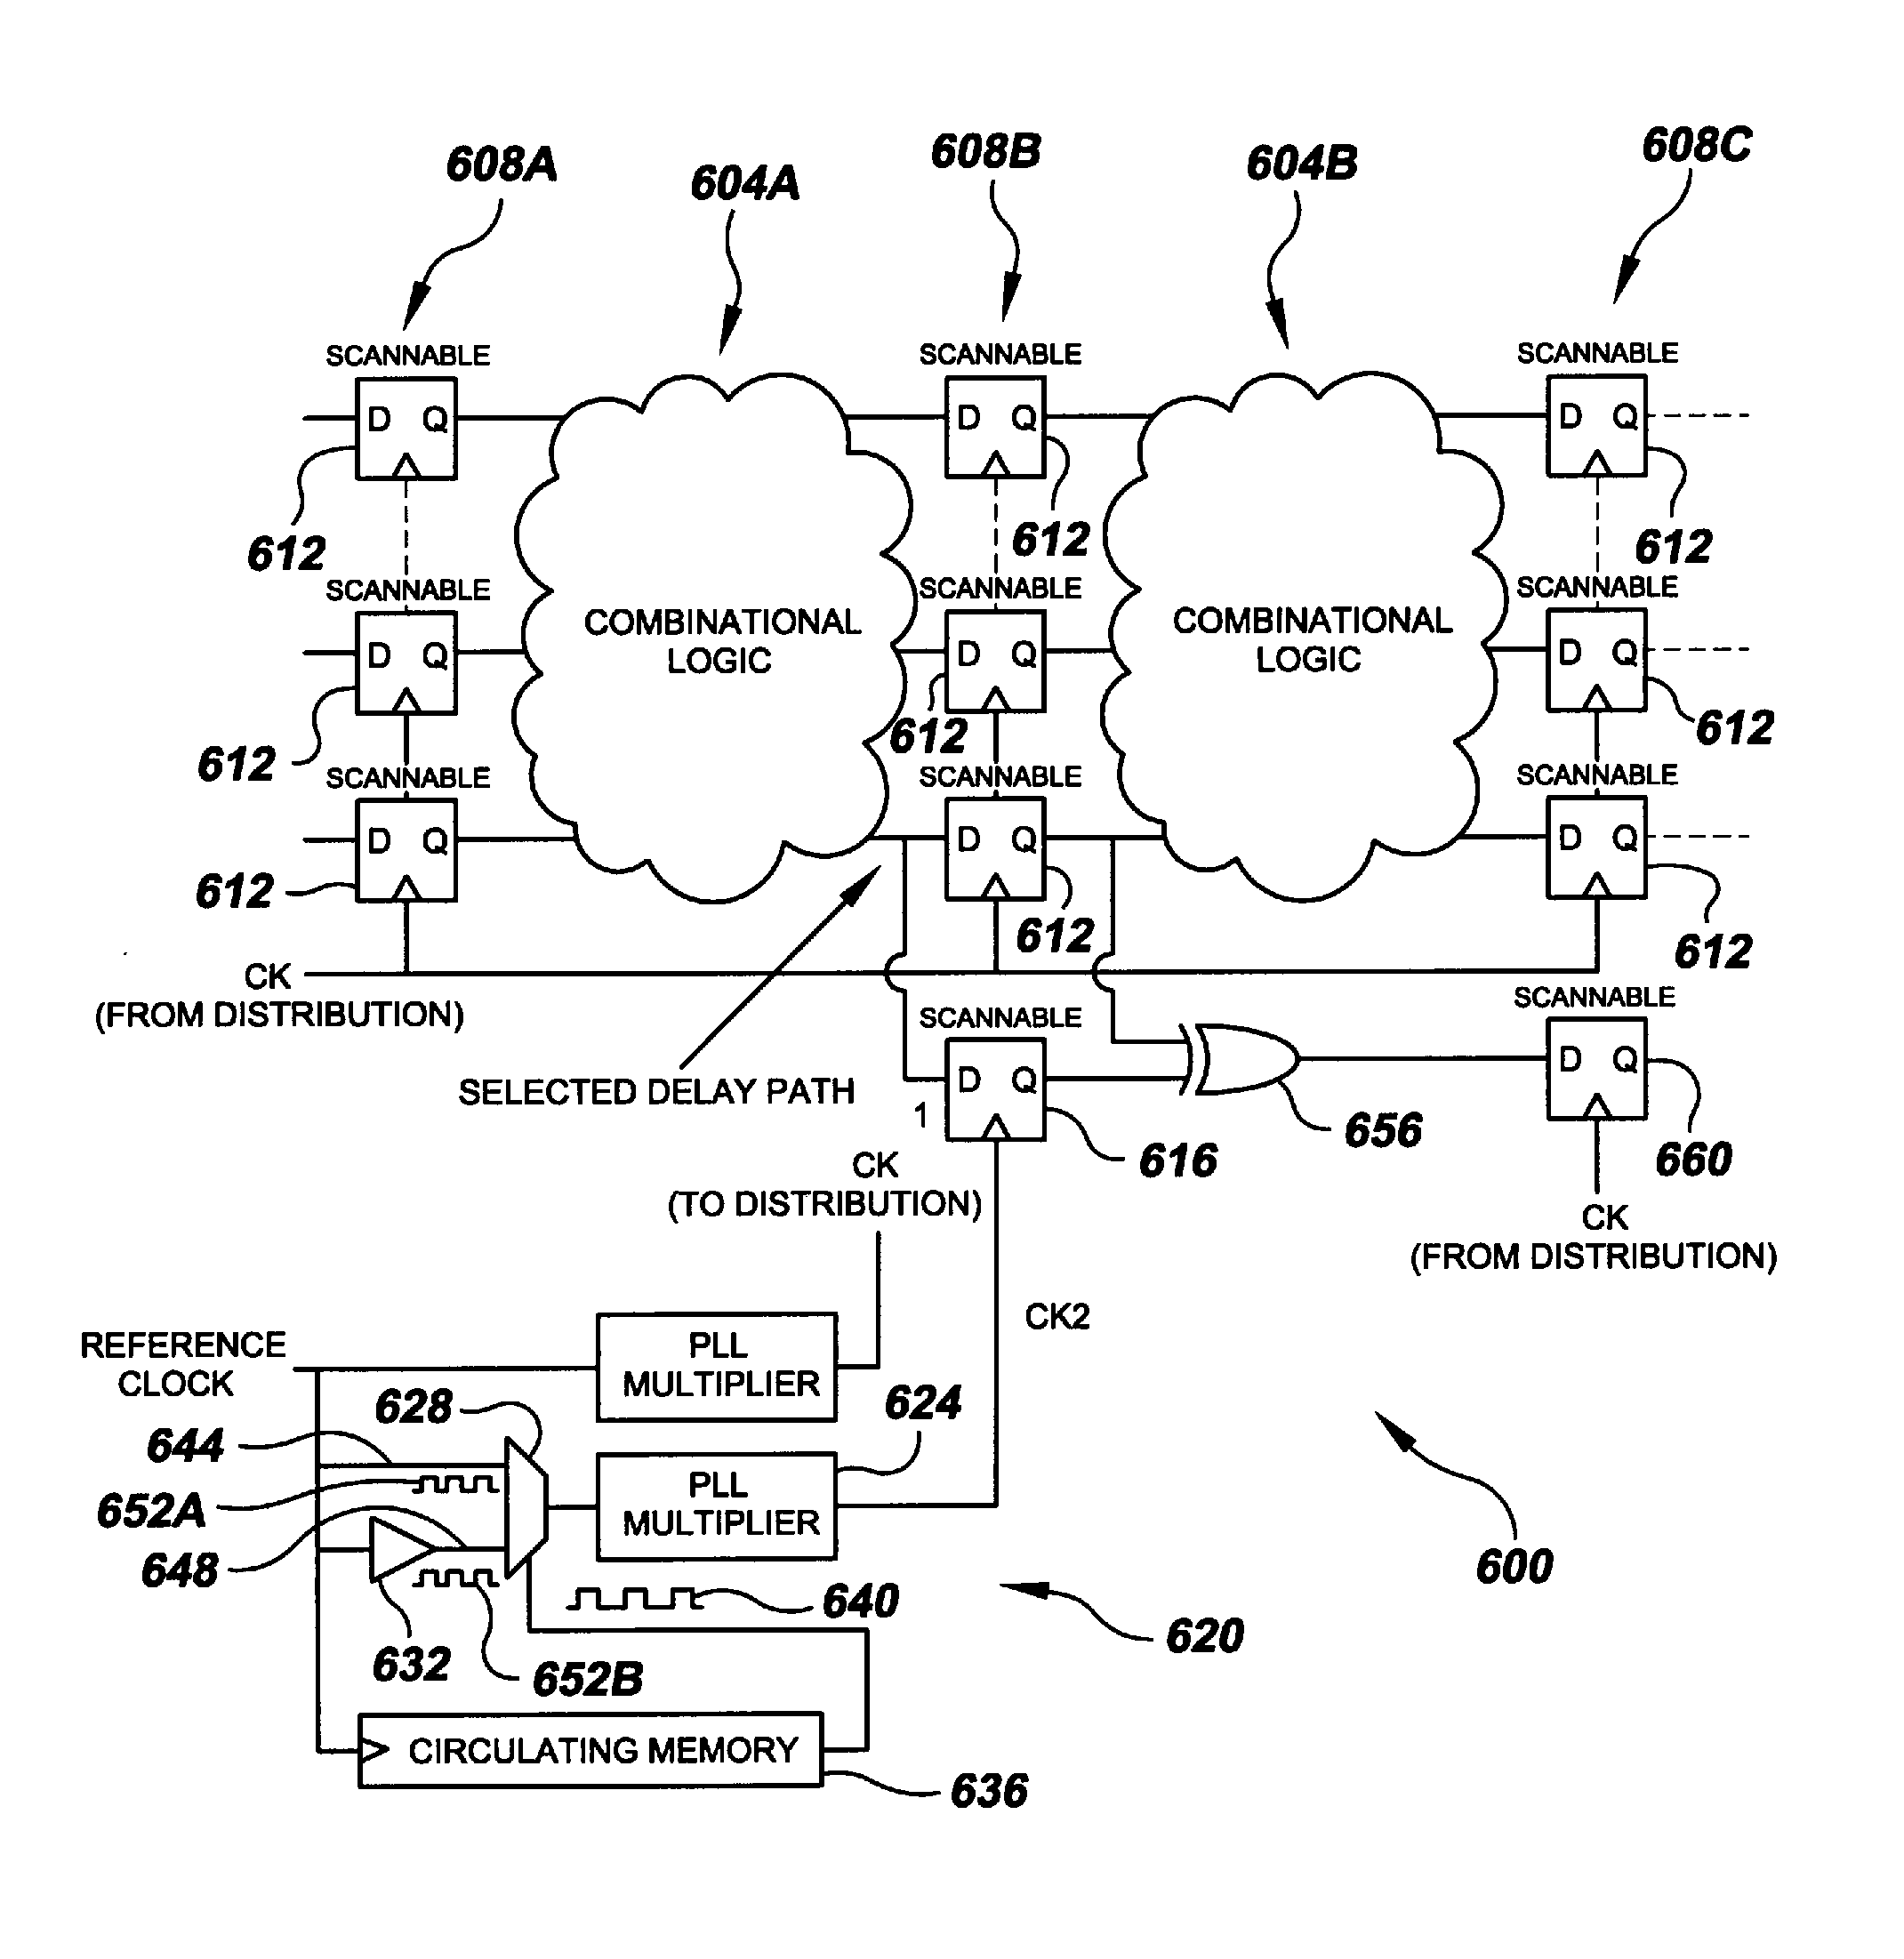 Systems and Methods for Testing and Diagnosing Delay Faults and For Parametric Testing in Digital Circuits